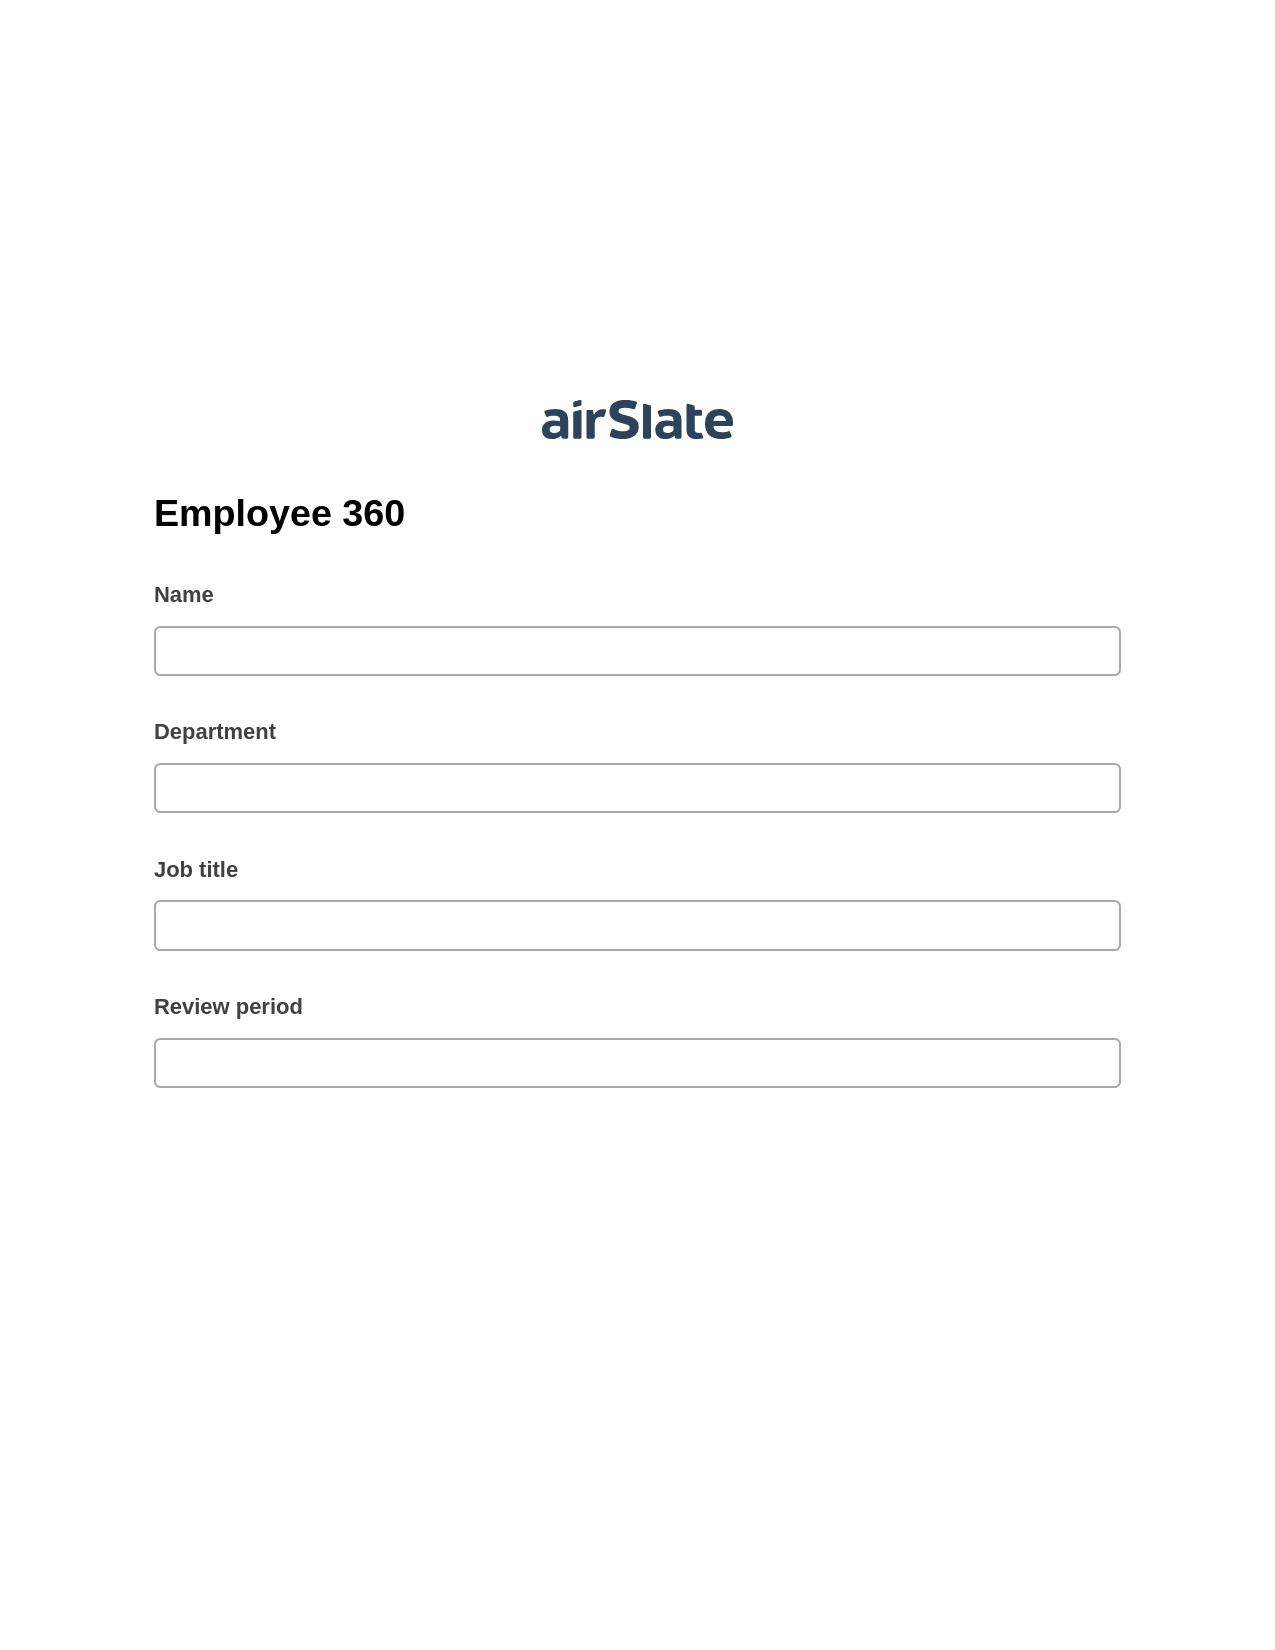 Multirole Employee 360 Pre-fill from CSV File Bot, Roles Reminder Bot, Archive to OneDrive Bot